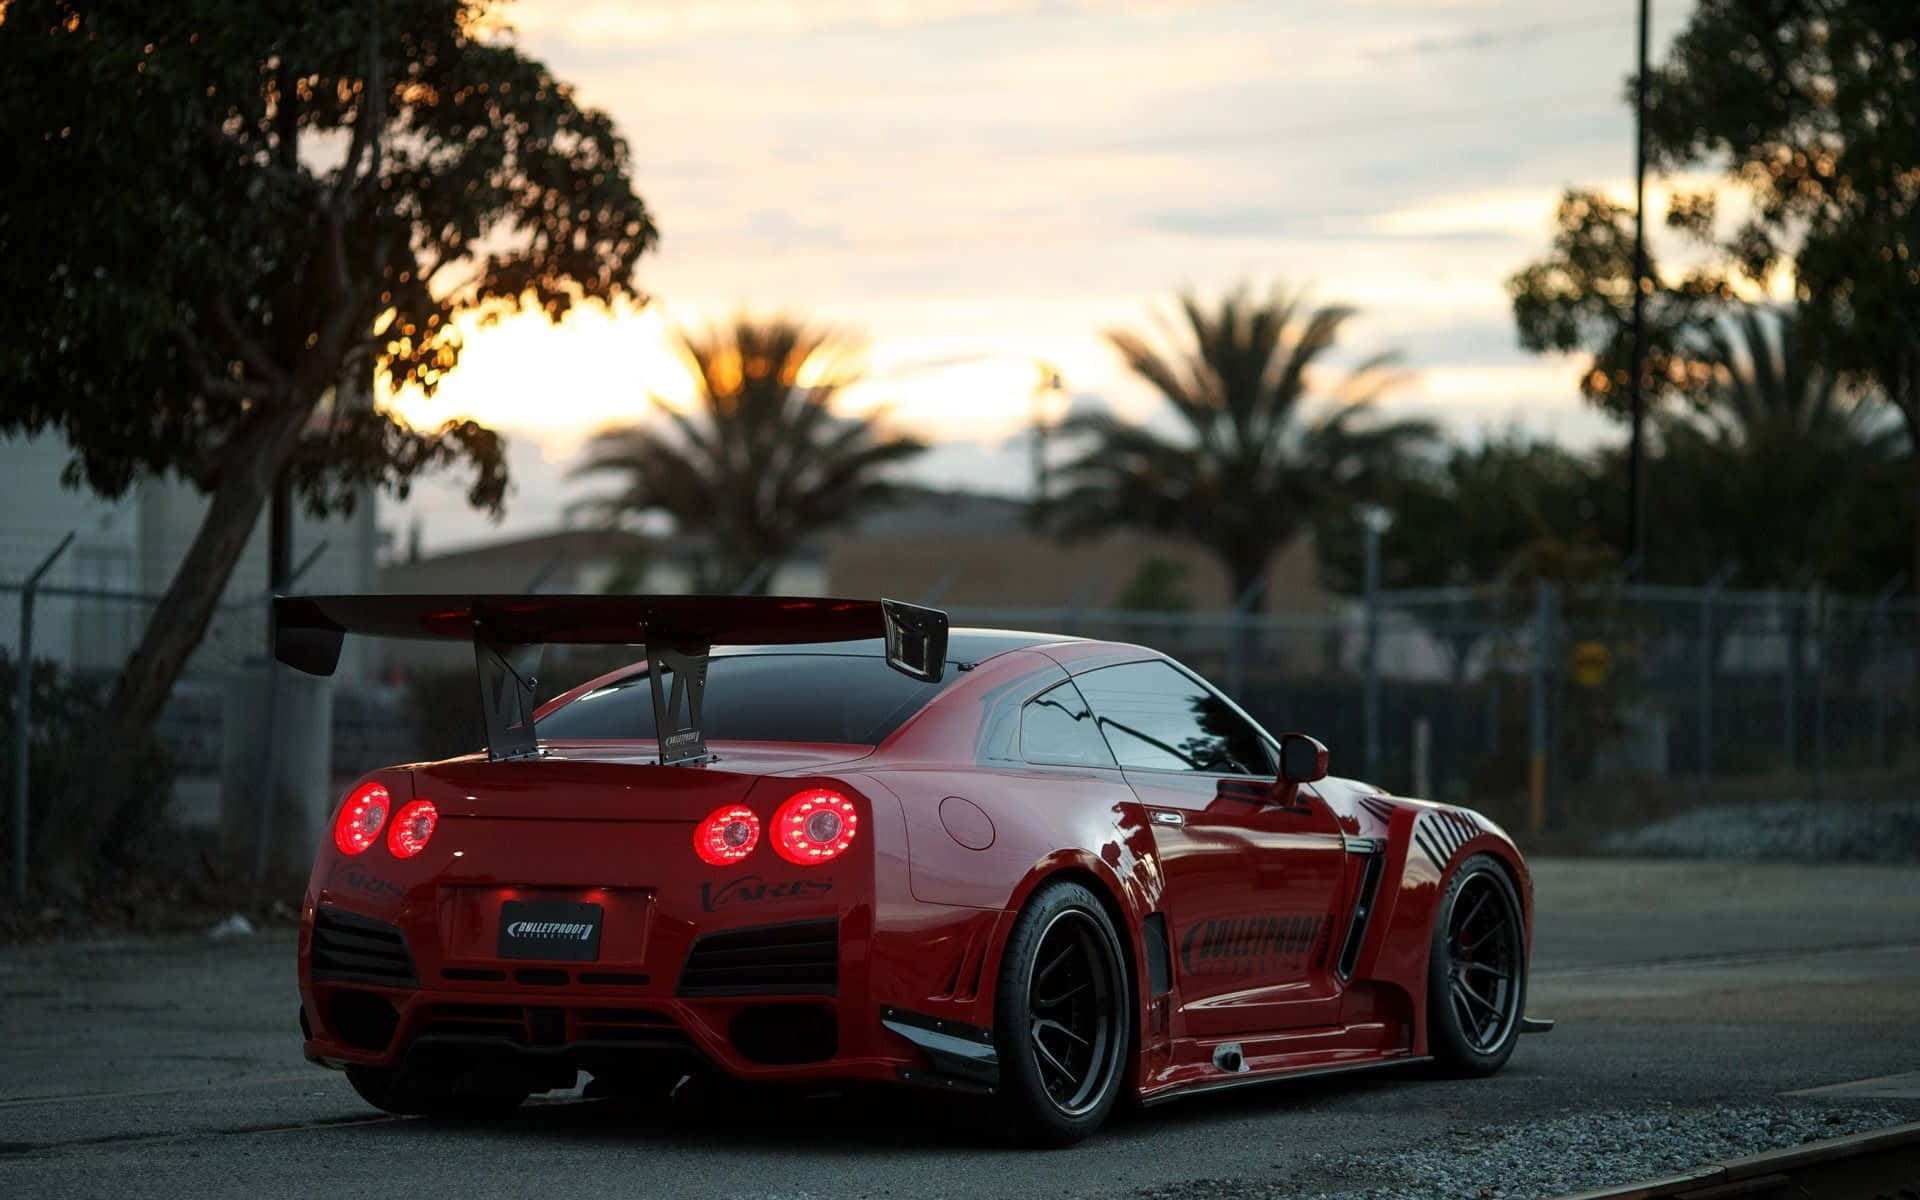 Speed And Style: The Cool Gtr